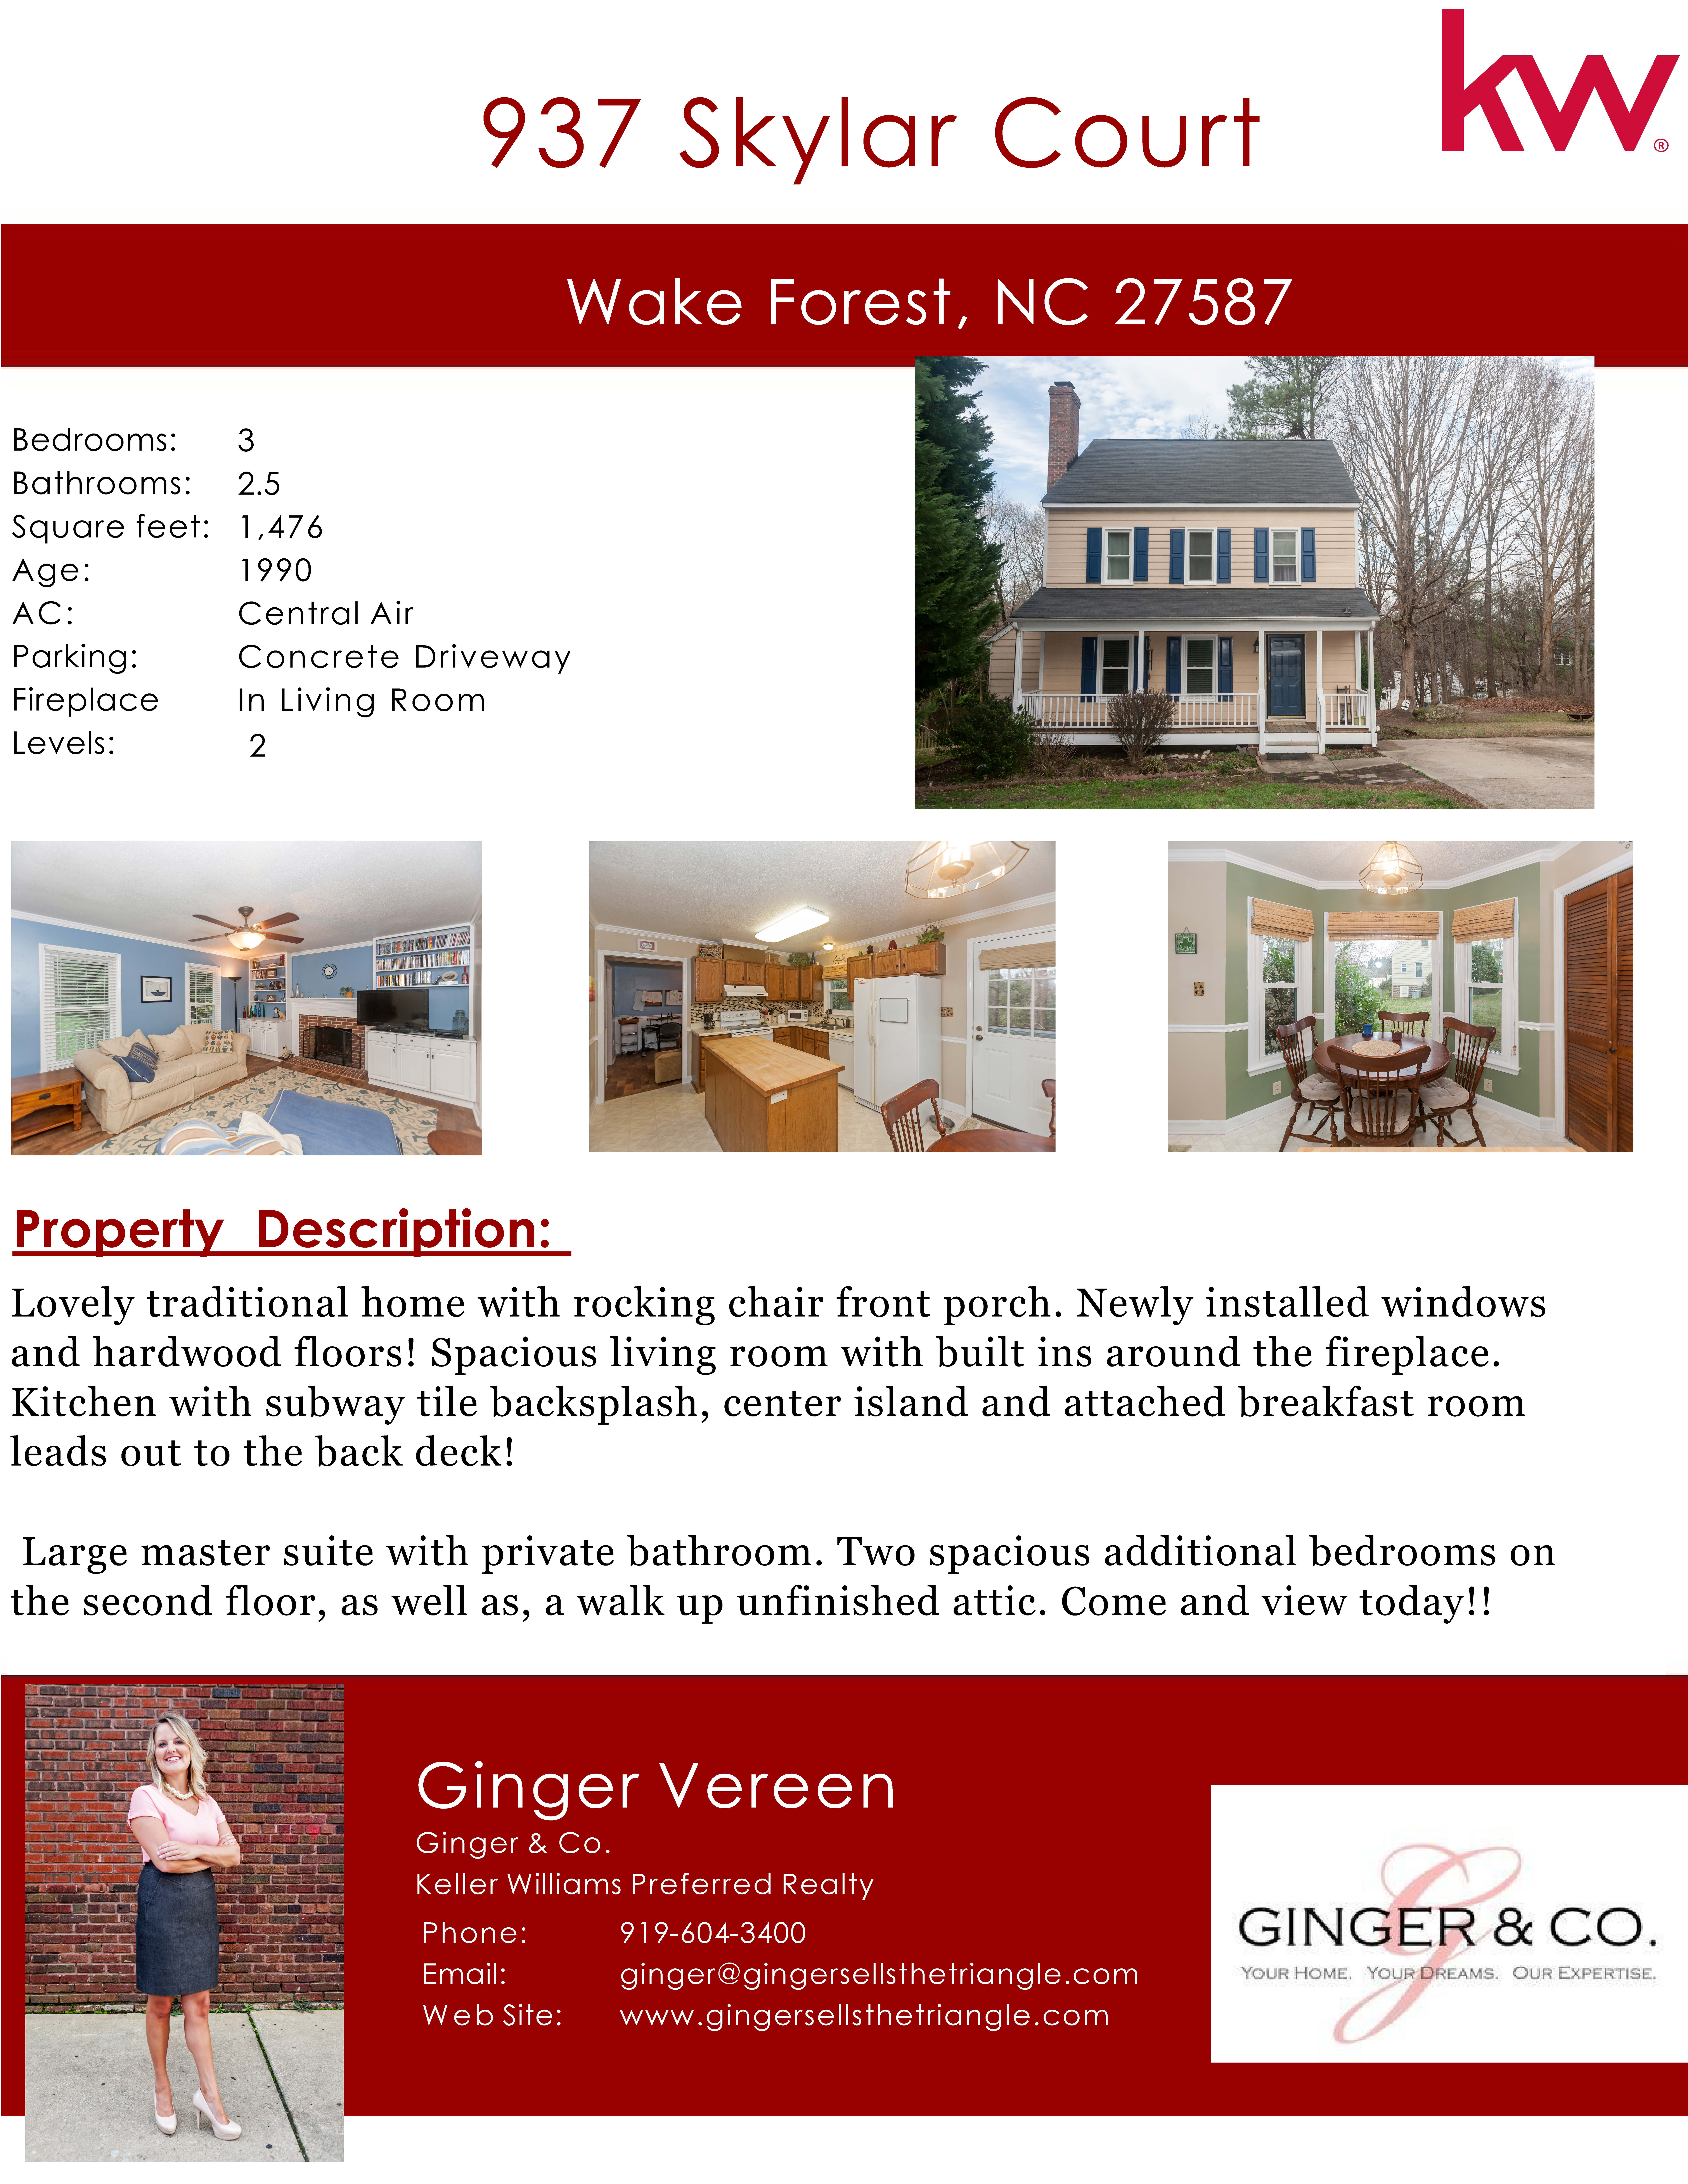 12 Recommended Pc Hardwood Floors Waterbury Ct 2024 free download pc hardwood floors waterbury ct of just listed 937 skylar court wake forest ginger co regarding 937 skylar court wake forest